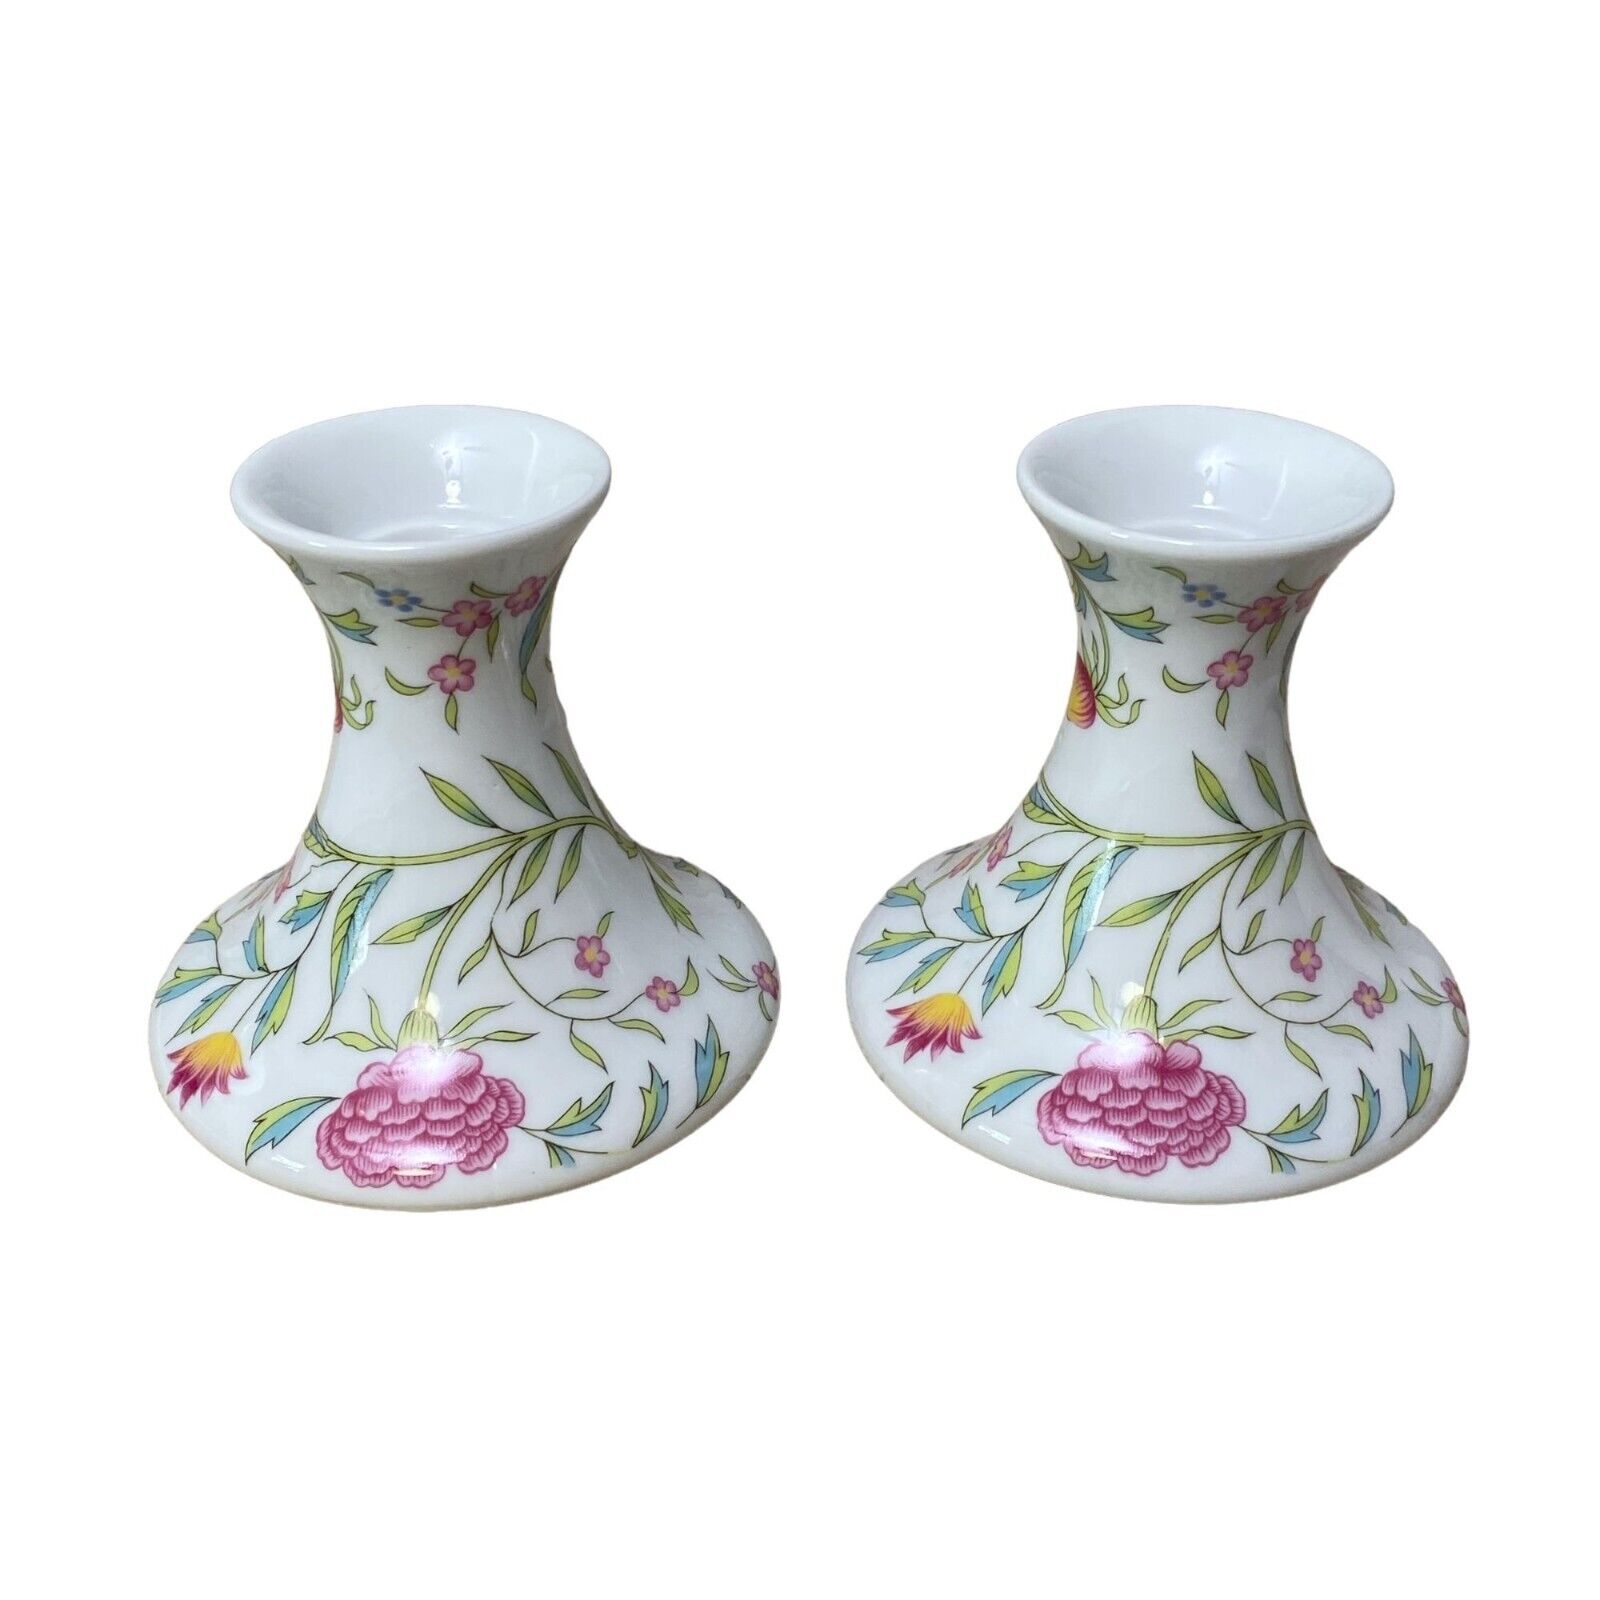 Avignon Pair of Candle Holders Chintz Floral Toscany Japan Ceramic Candlesticks